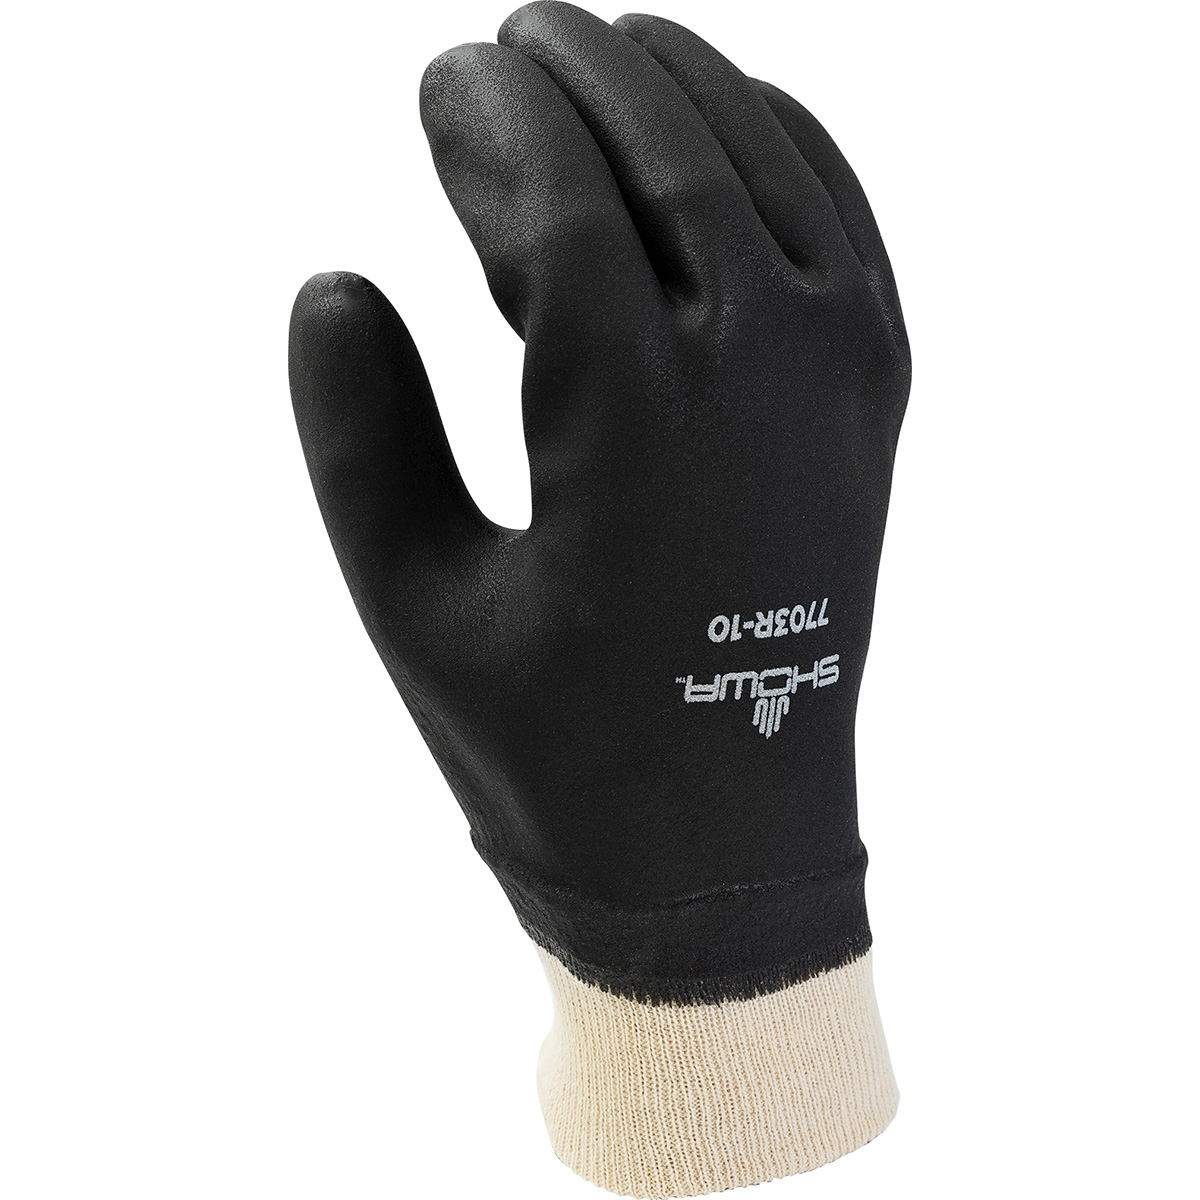 All general-purpose industrial application, PVC fully coated knit wrist w/jersey liner, Sanitized, black, rough finish, large